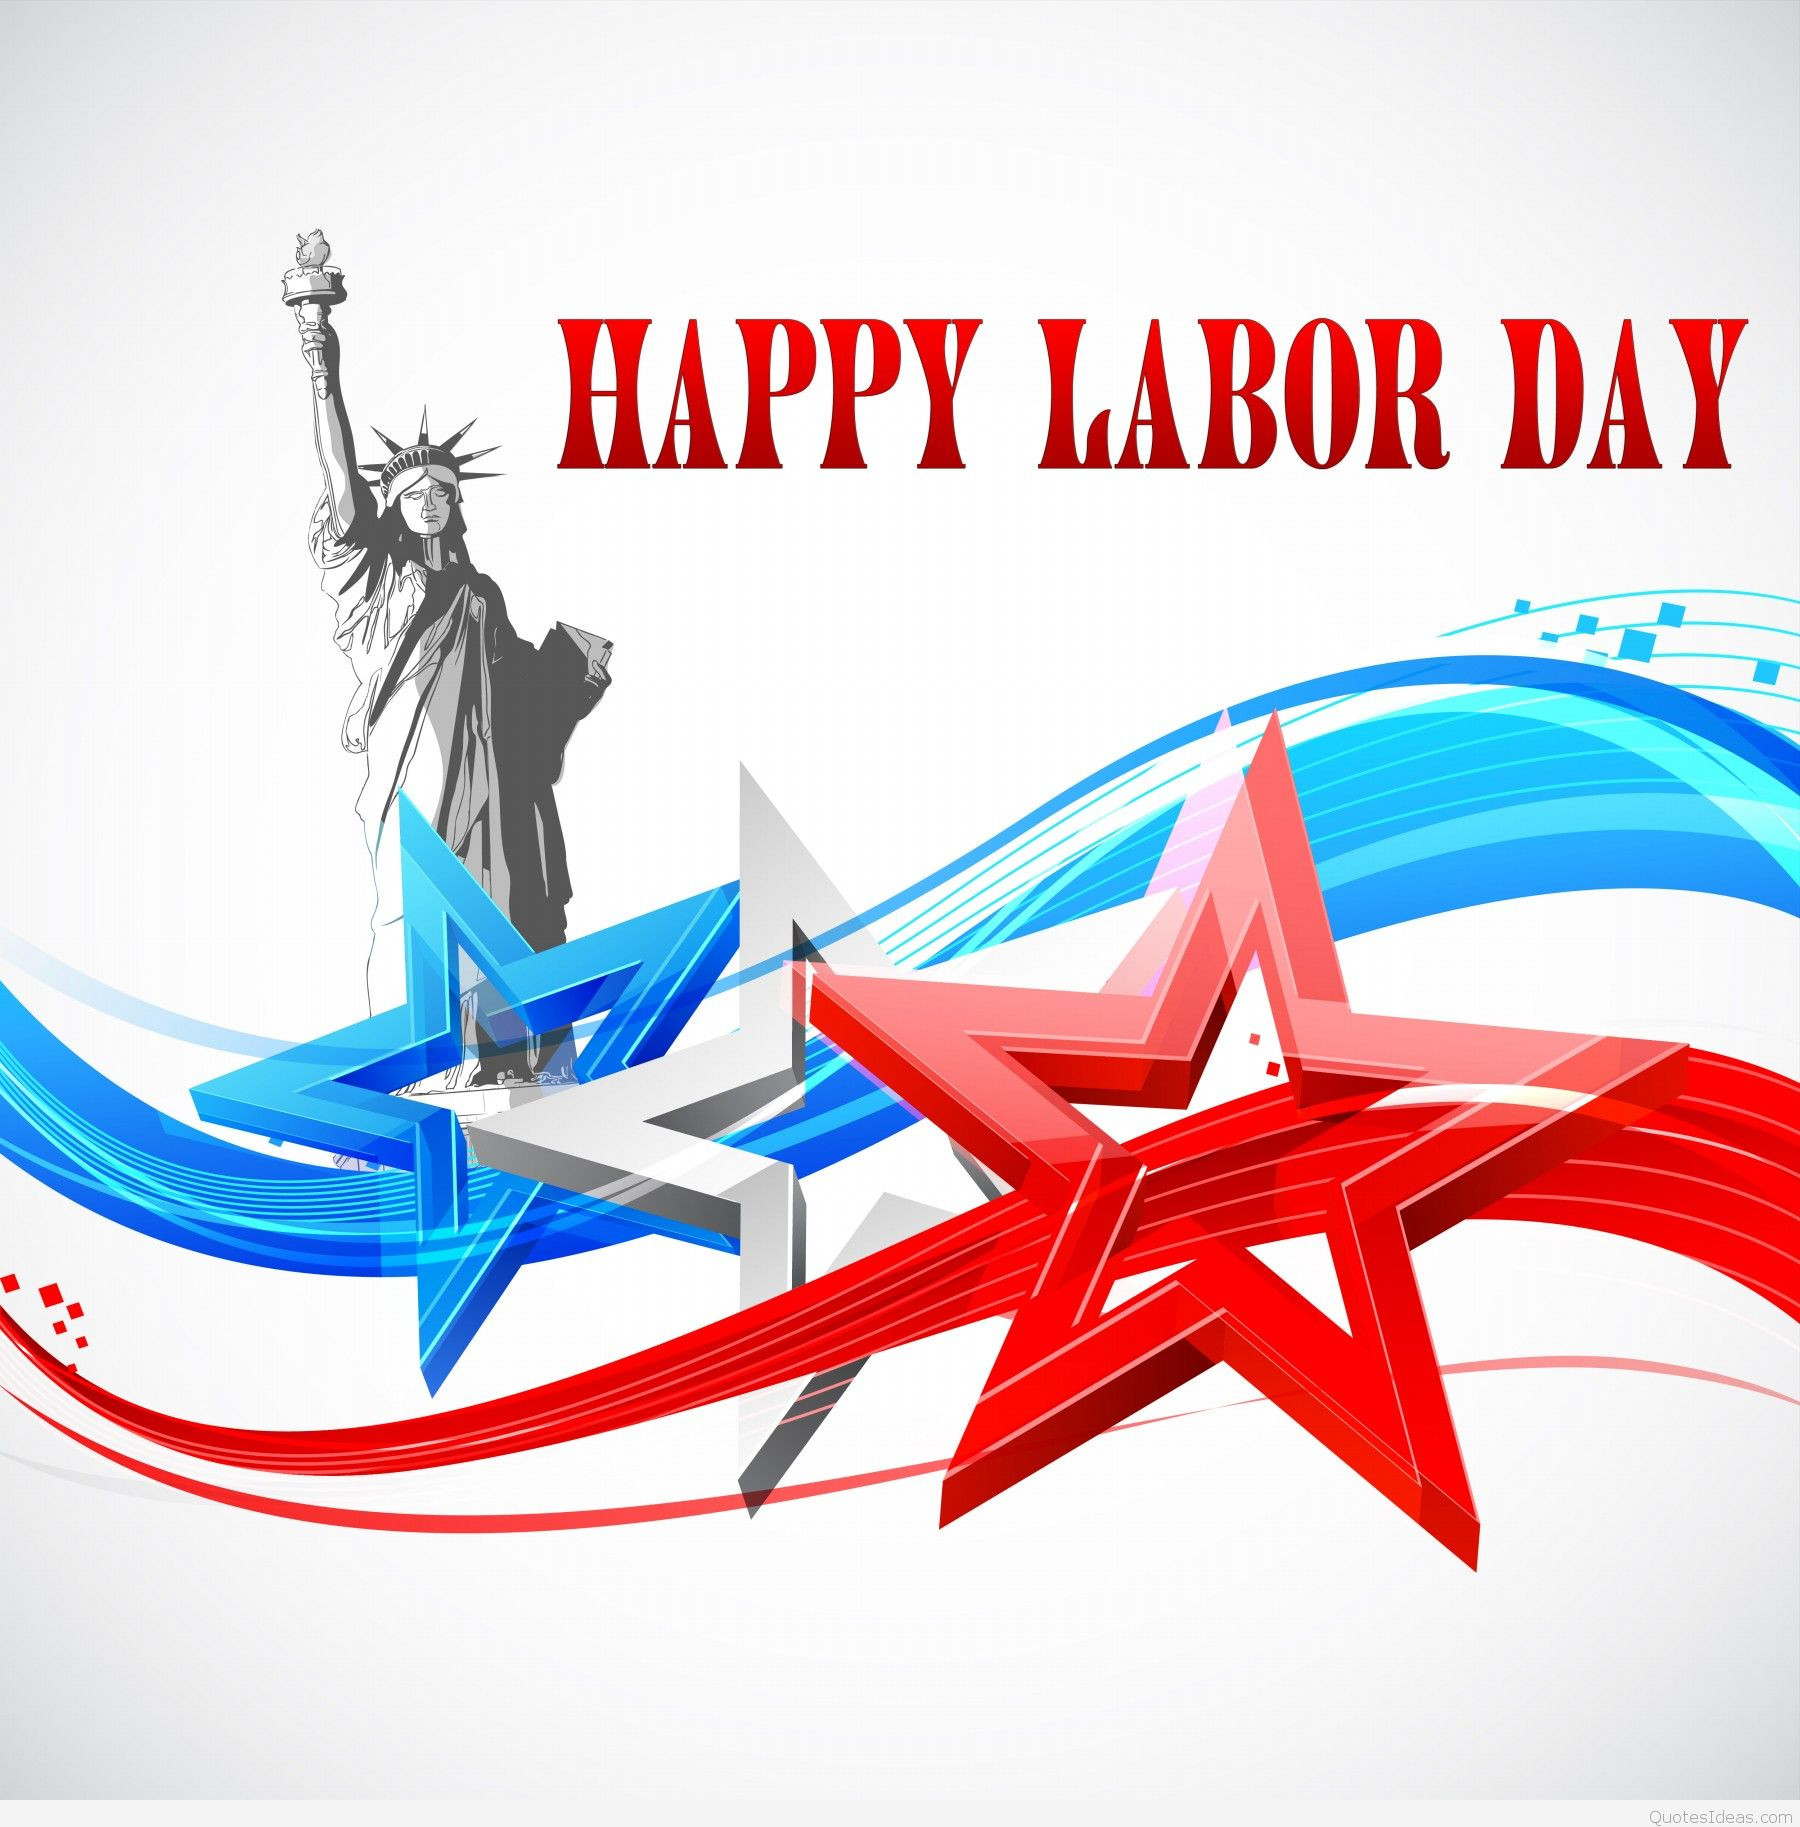 Happy Labor Day Quotes
 Happy labor day wishes quotes and sayings